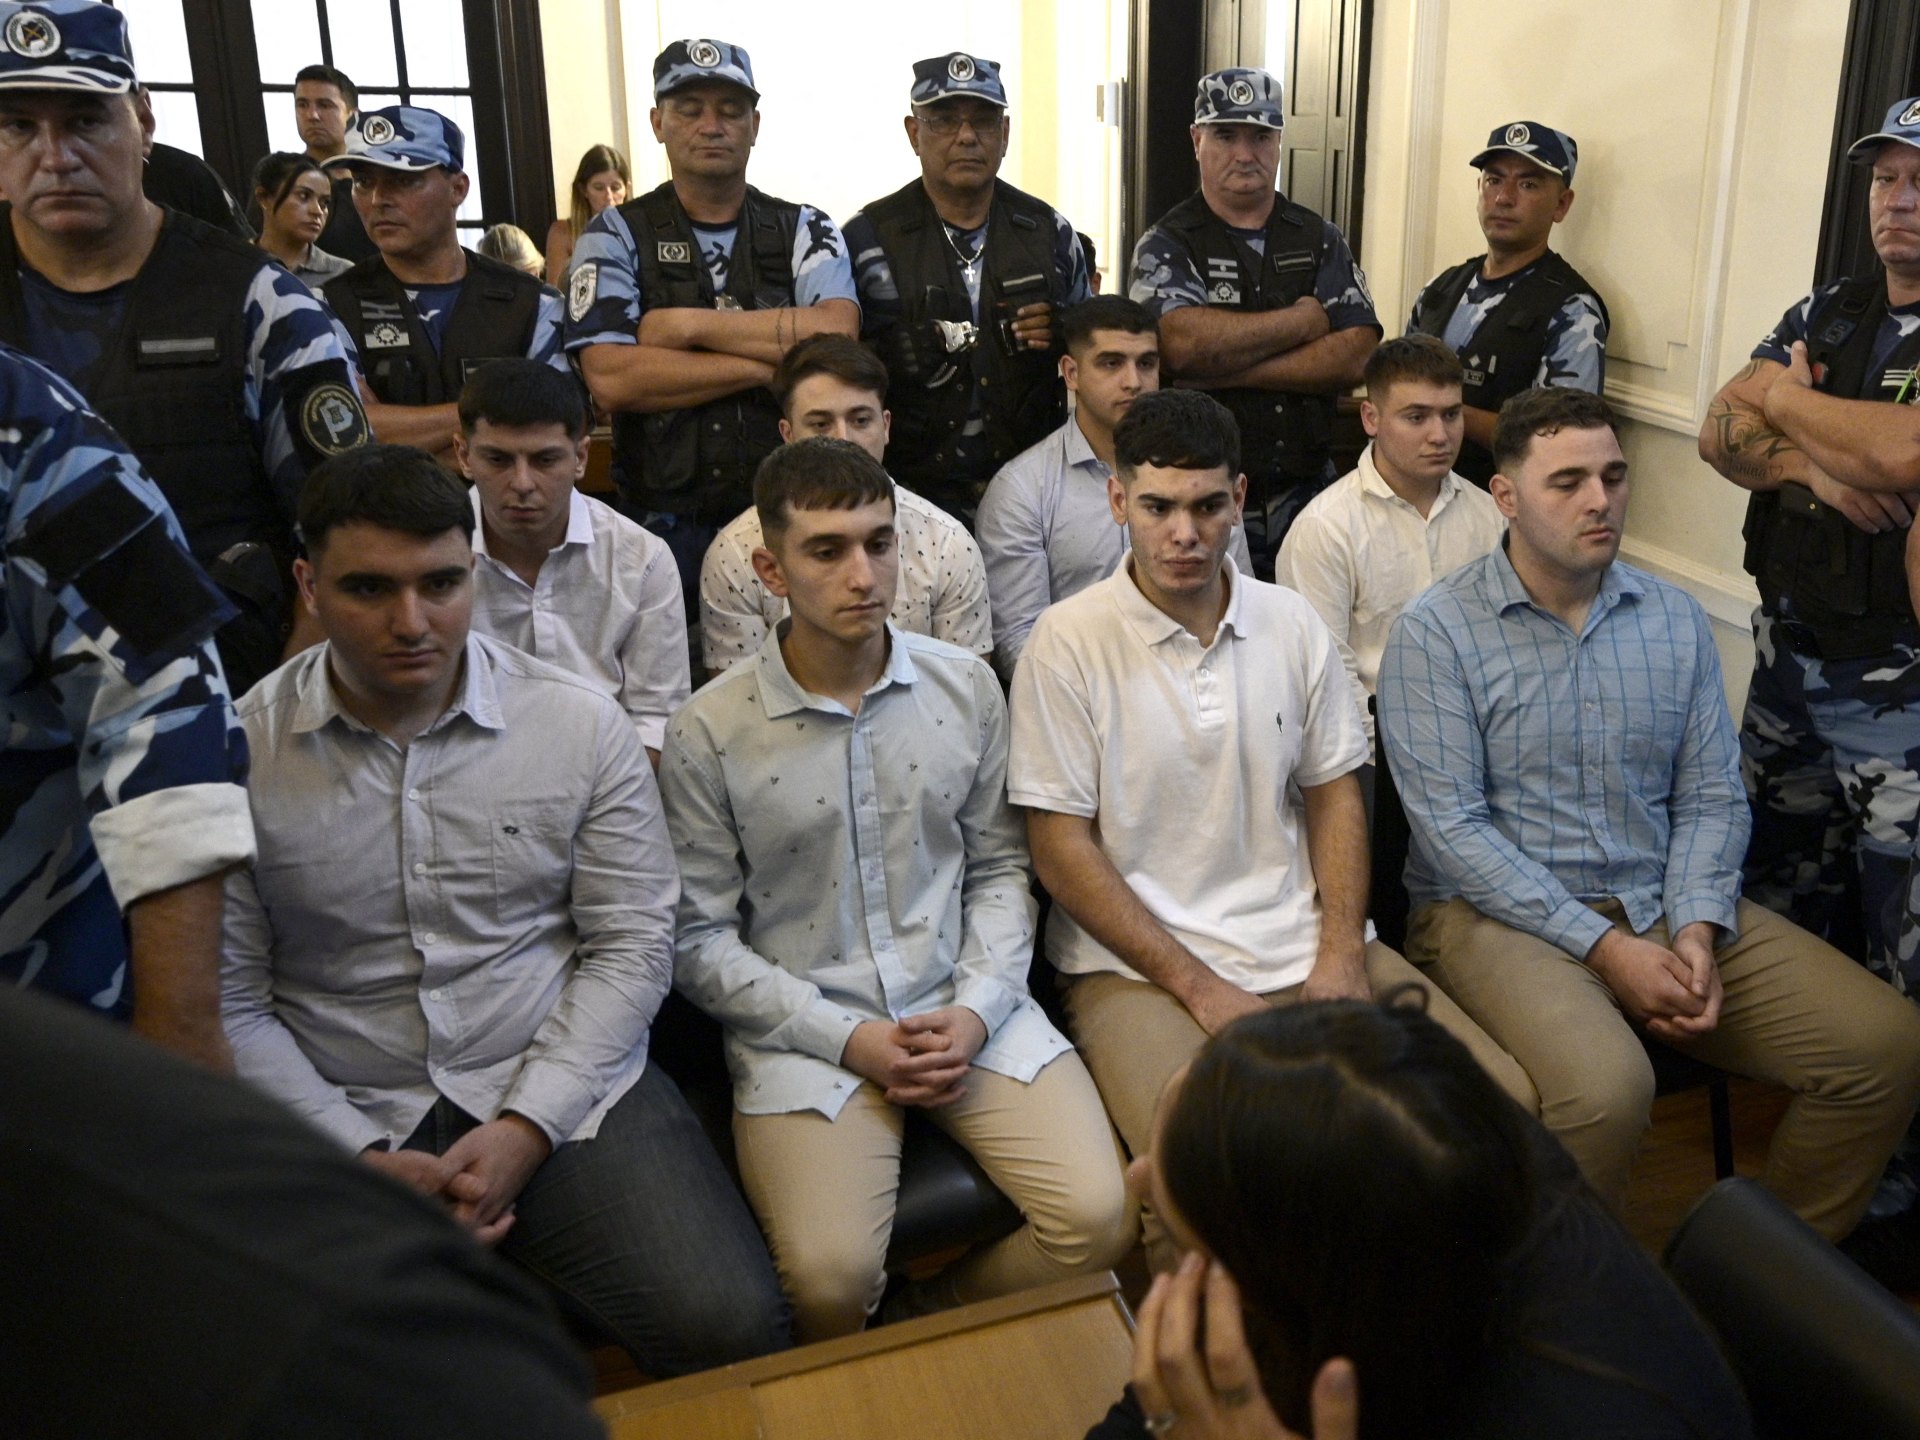 Argentina rugby players sentenced in high-profile beating death